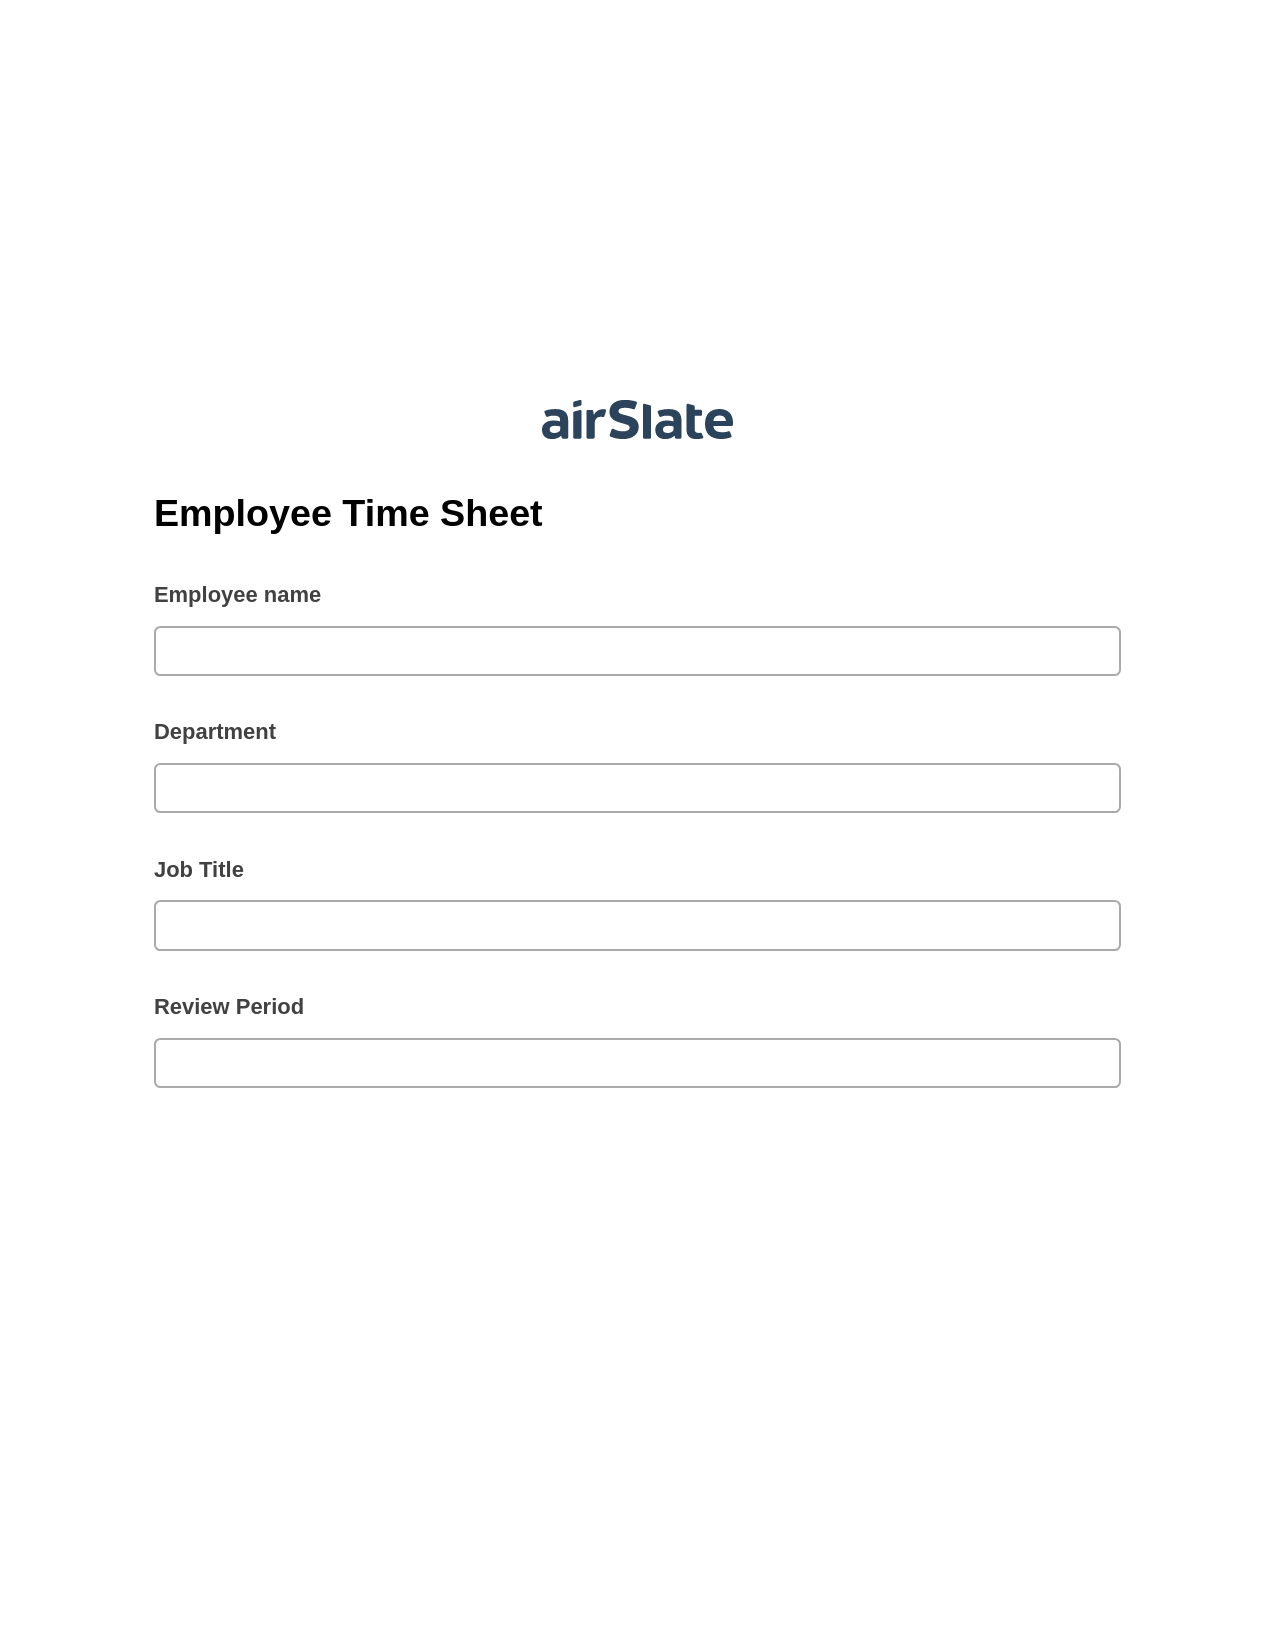 Multirole Employee Time Sheet Pre-fill from Salesforce Records with SOQL Bot, Create slate addon, Archive to Dropbox Bot